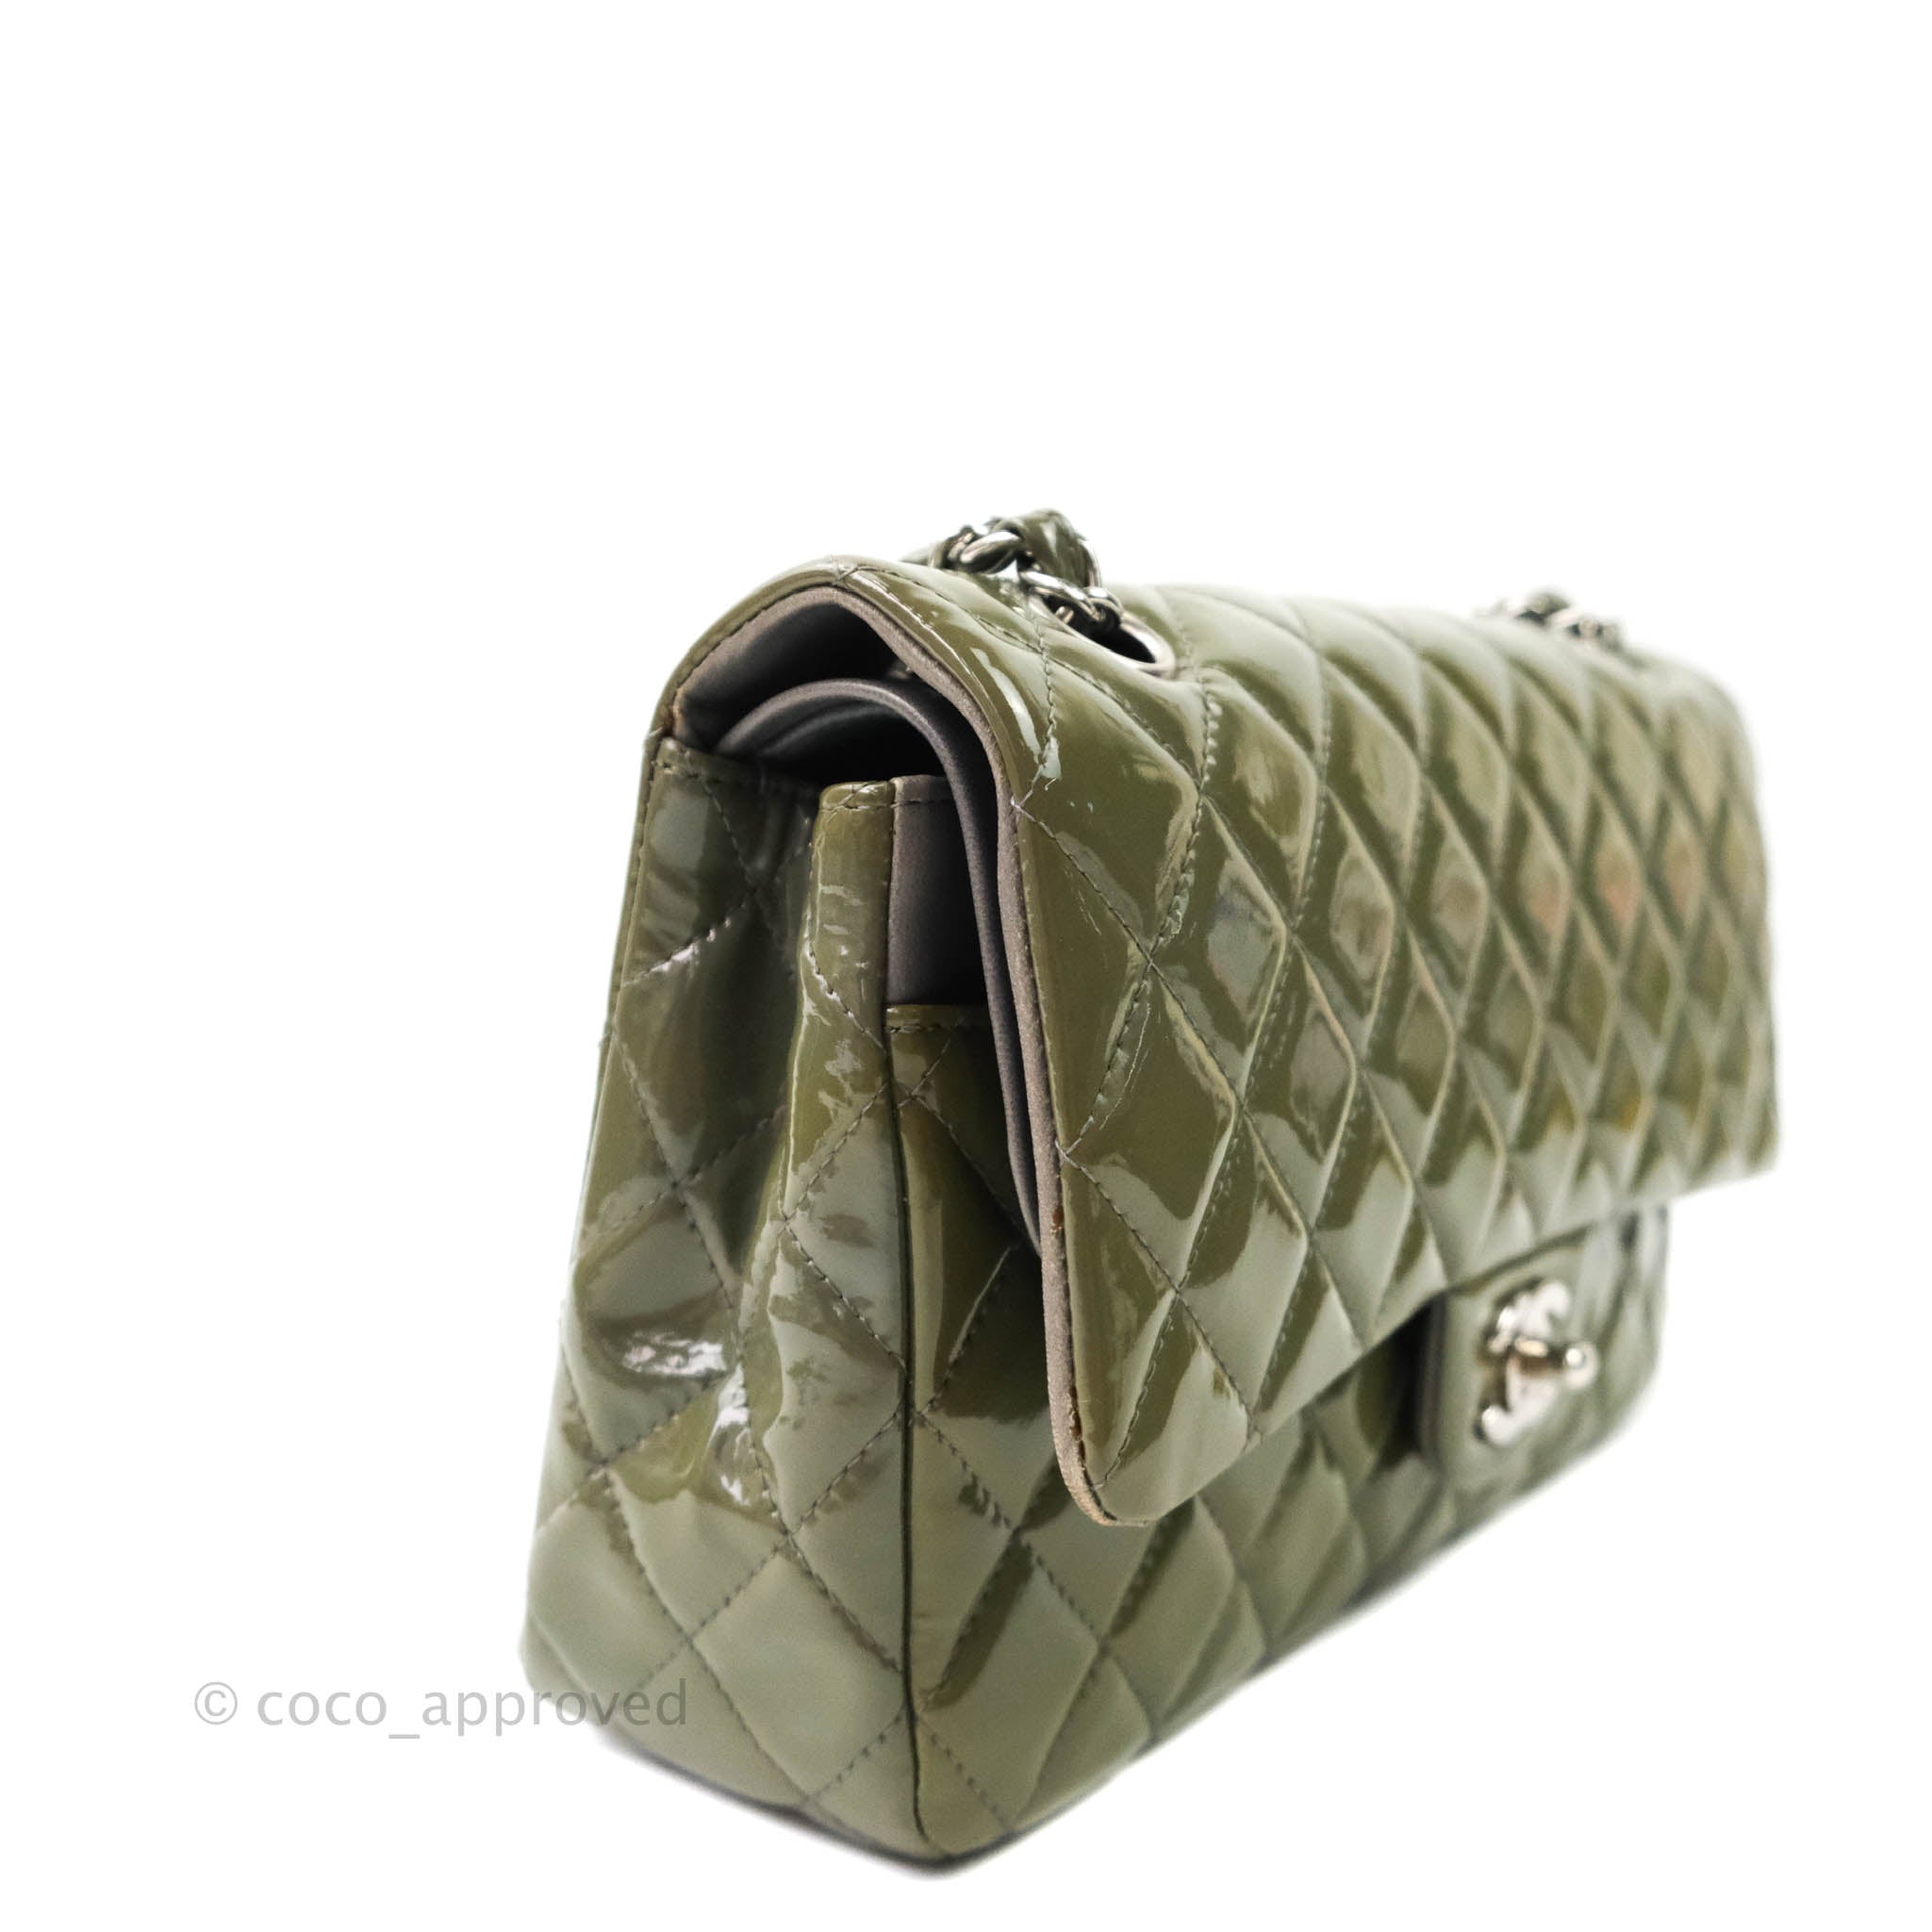 Chanel Green Caviar Small Classic Double Flap Bag Light Gold